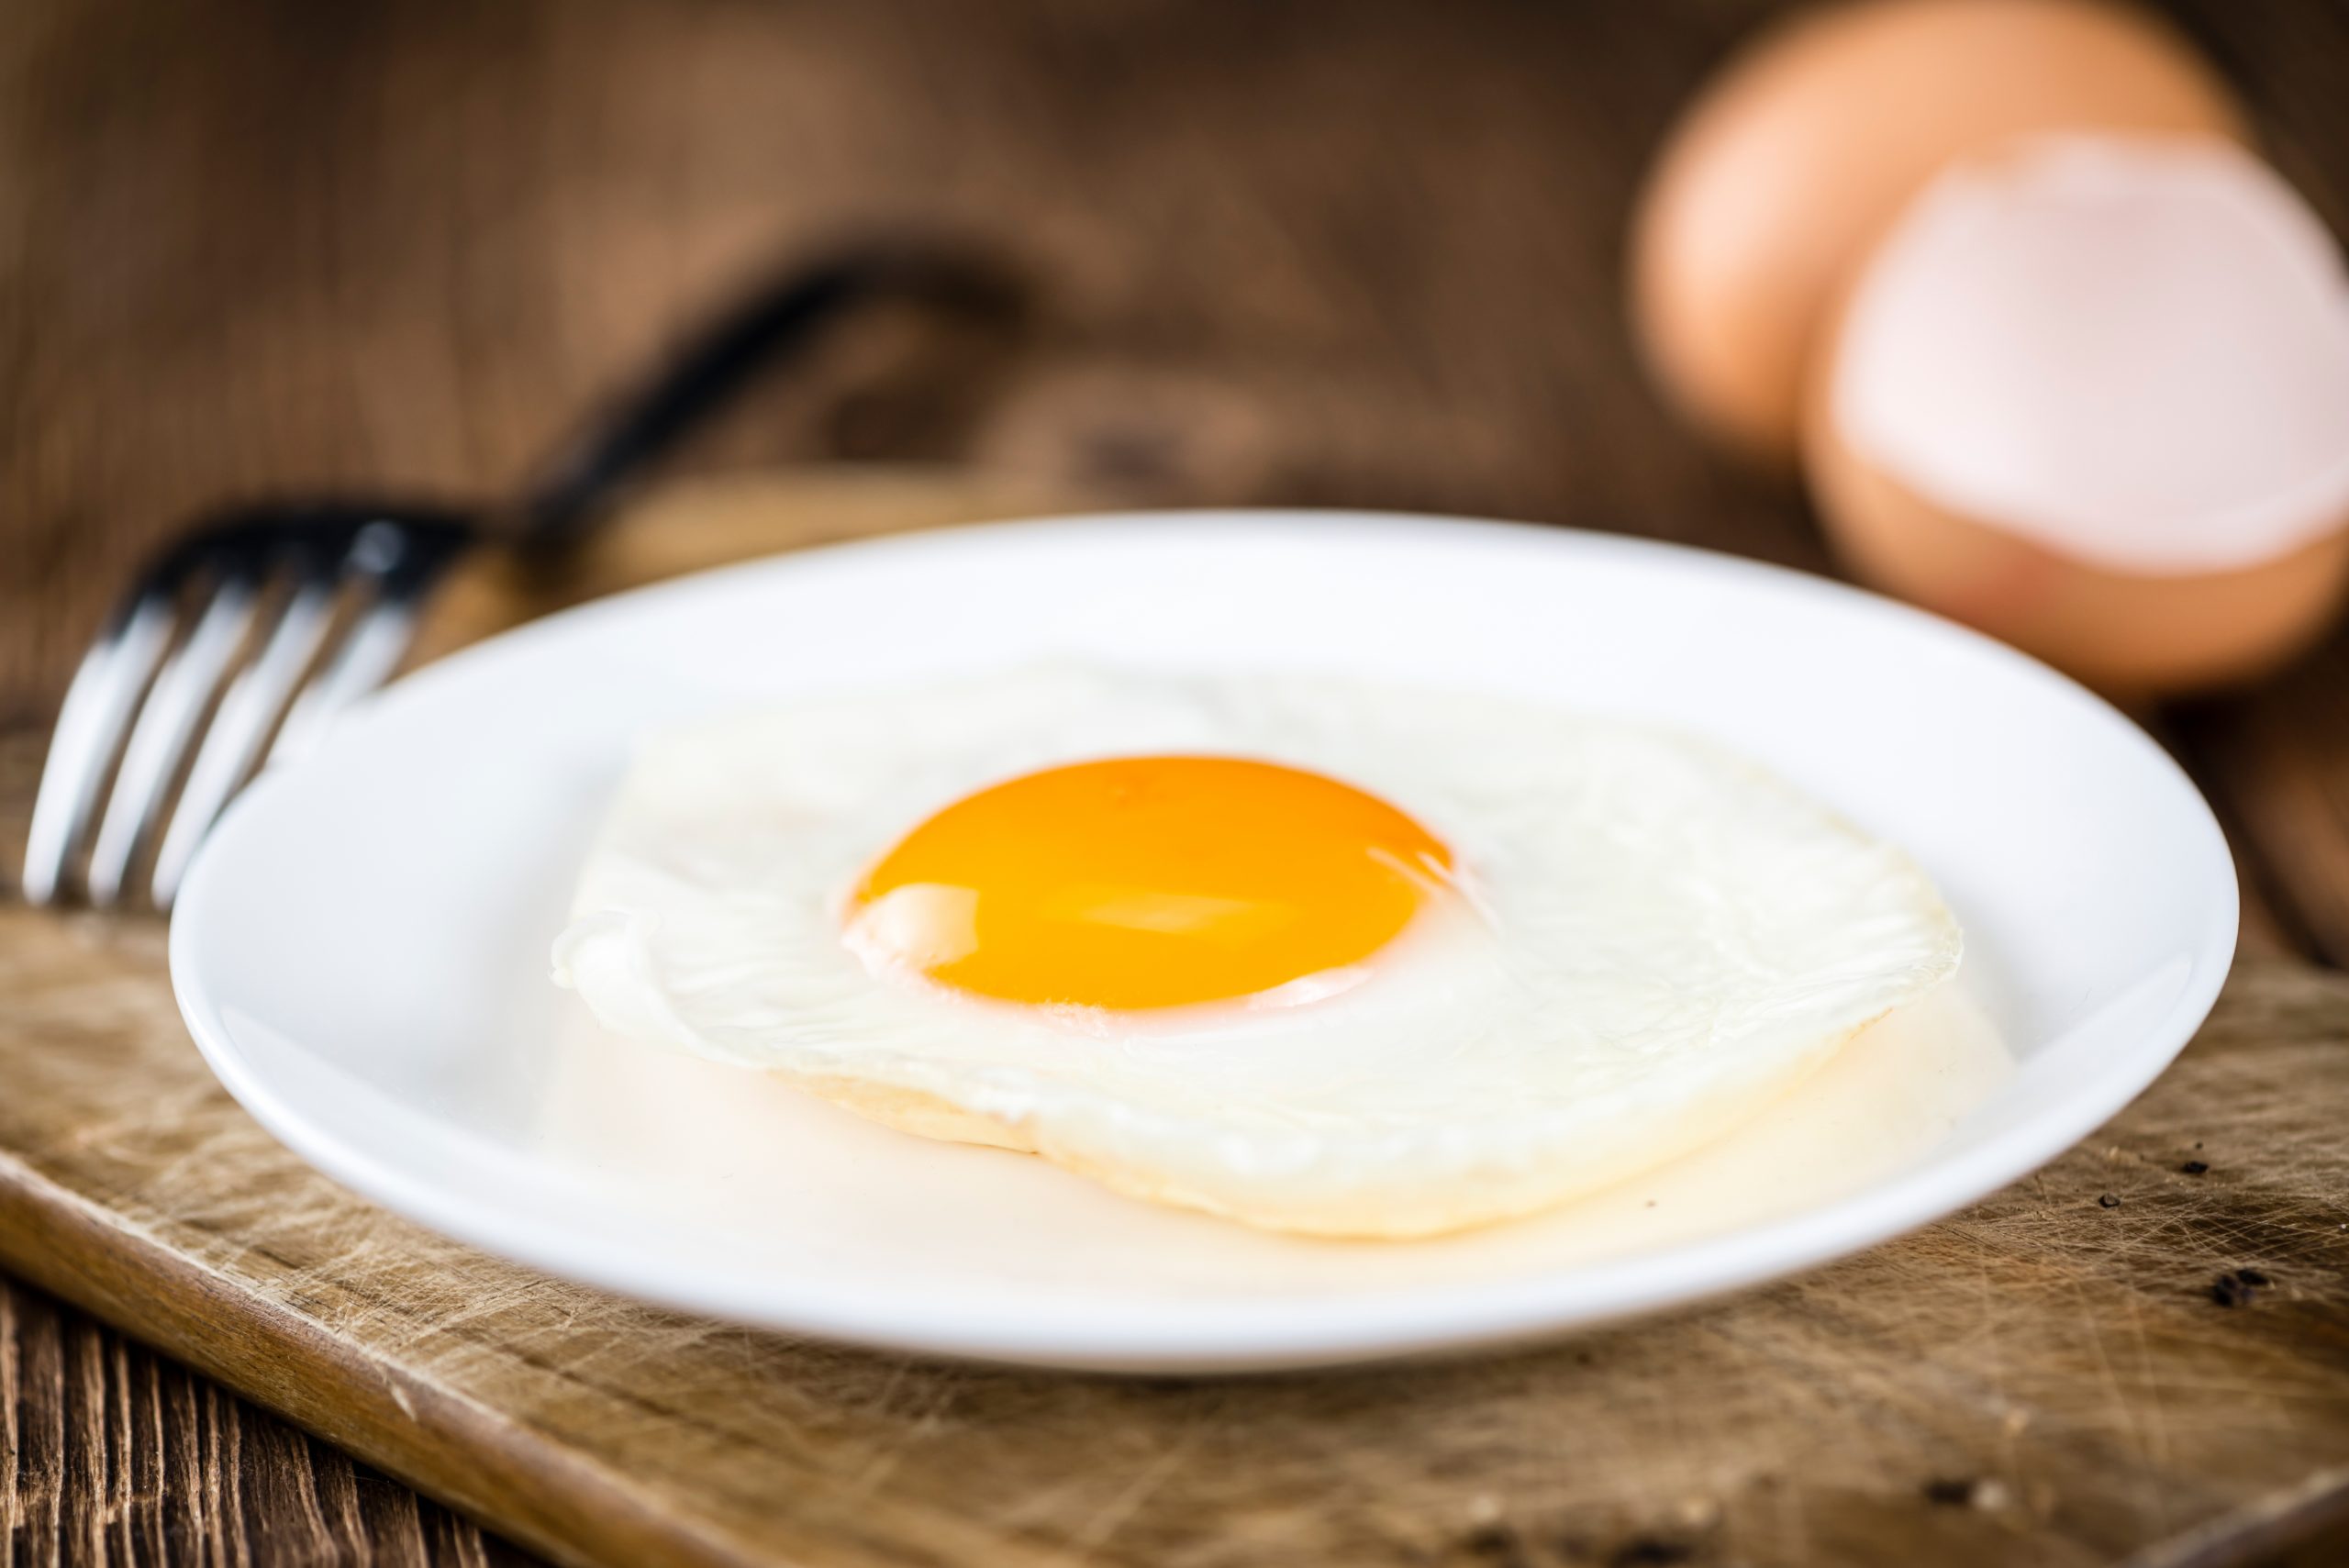 are eggs good for you?